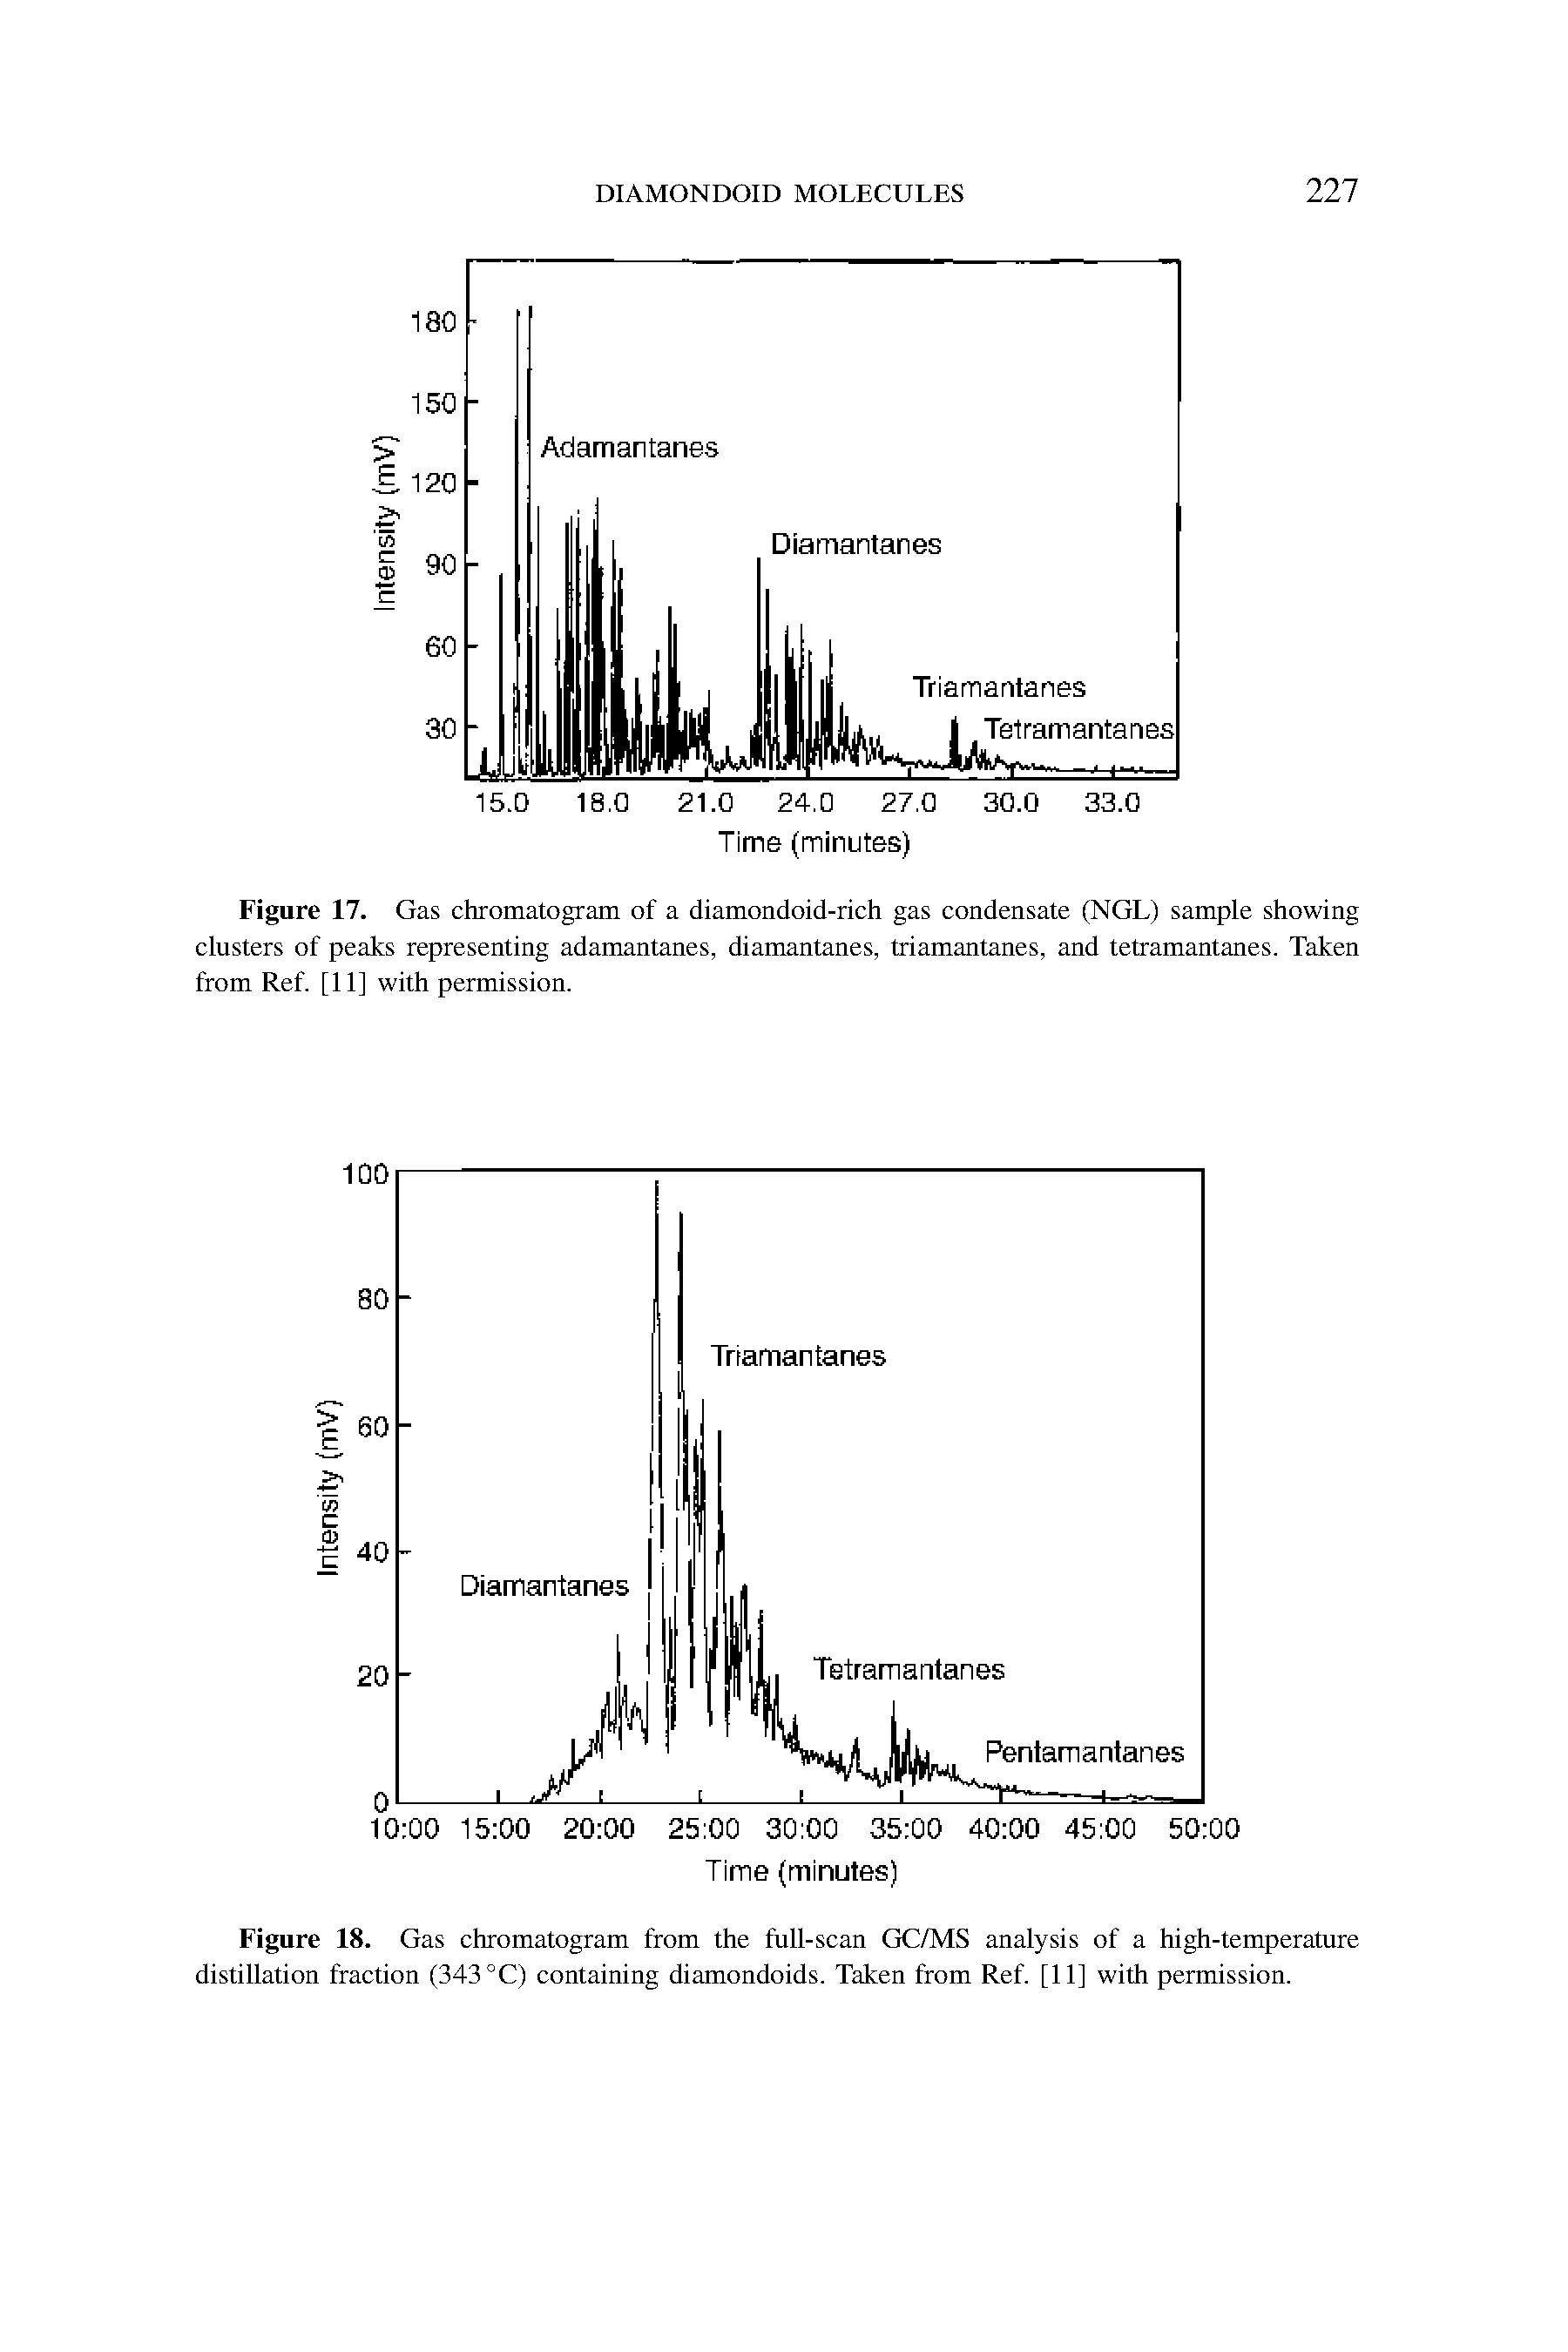 Figure 17. Gas chromatogram of a diamondoid-rich gas condensate (NGL) sample showing clusters of peaks representing adamantanes, diamantanes, triamantanes, and tetramantanes. Taken from Ref. [11] with permission.